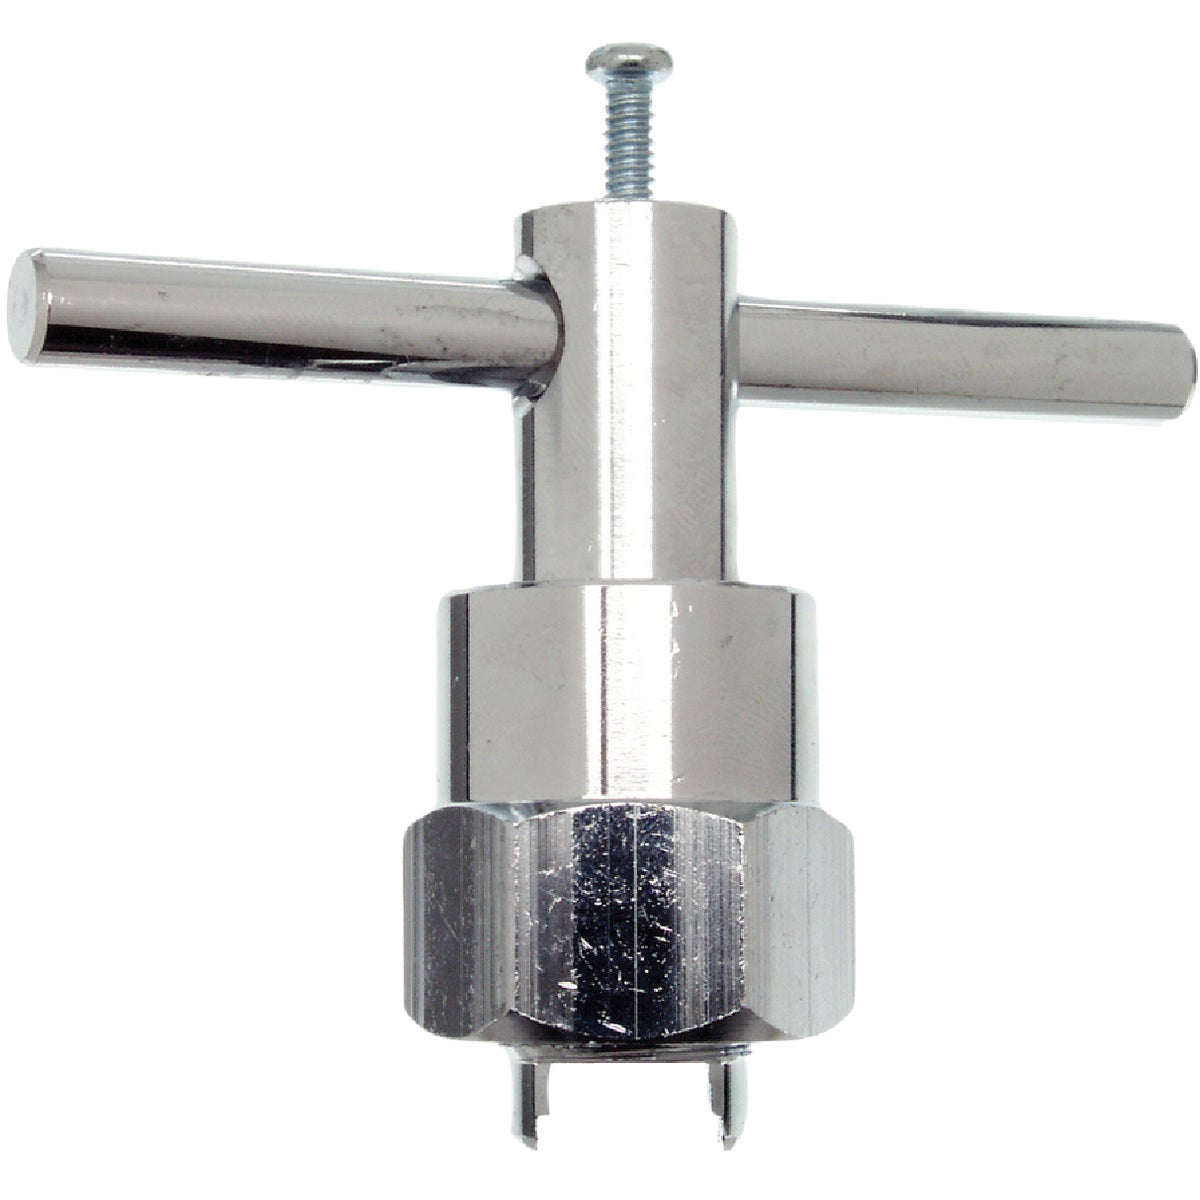 Item 416080, For use on Moen single handle faucets with newer cartridges.